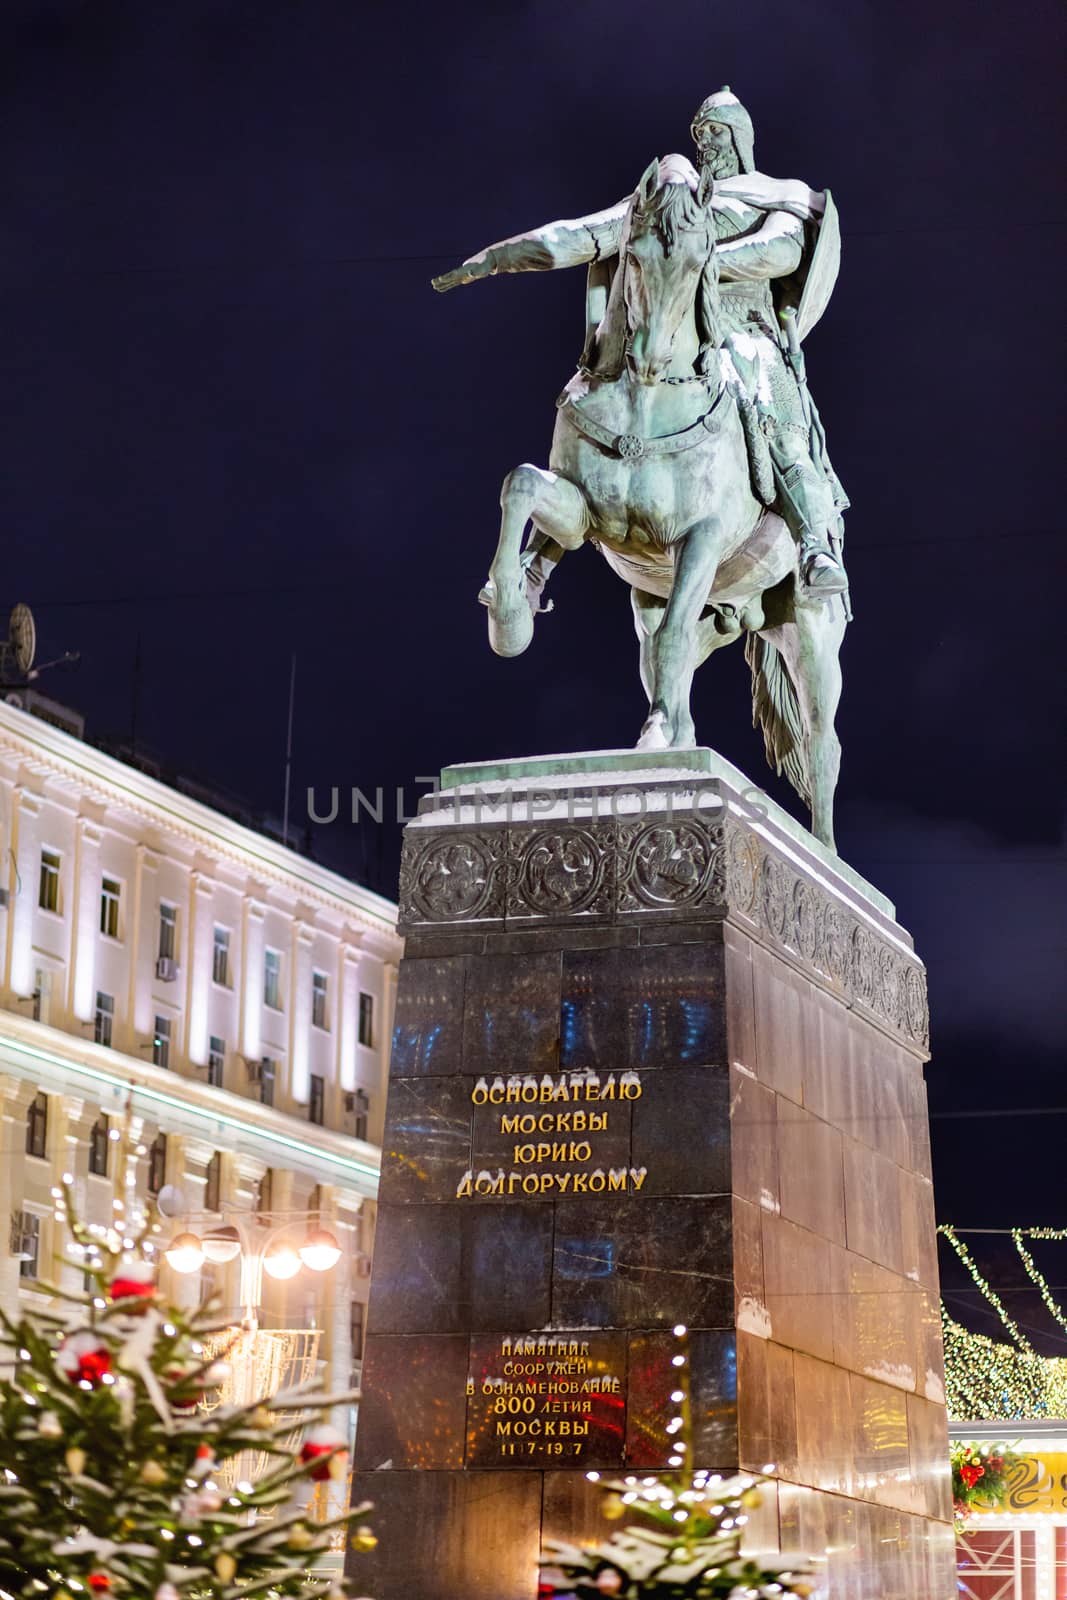 Monument to prince Yury Dolgorukiy, the founder of Moscow, on Tverskaya square (text on pedestal). Street decorated with light bulbs for New Year and Christmas celebration. Russia. by aksenovko